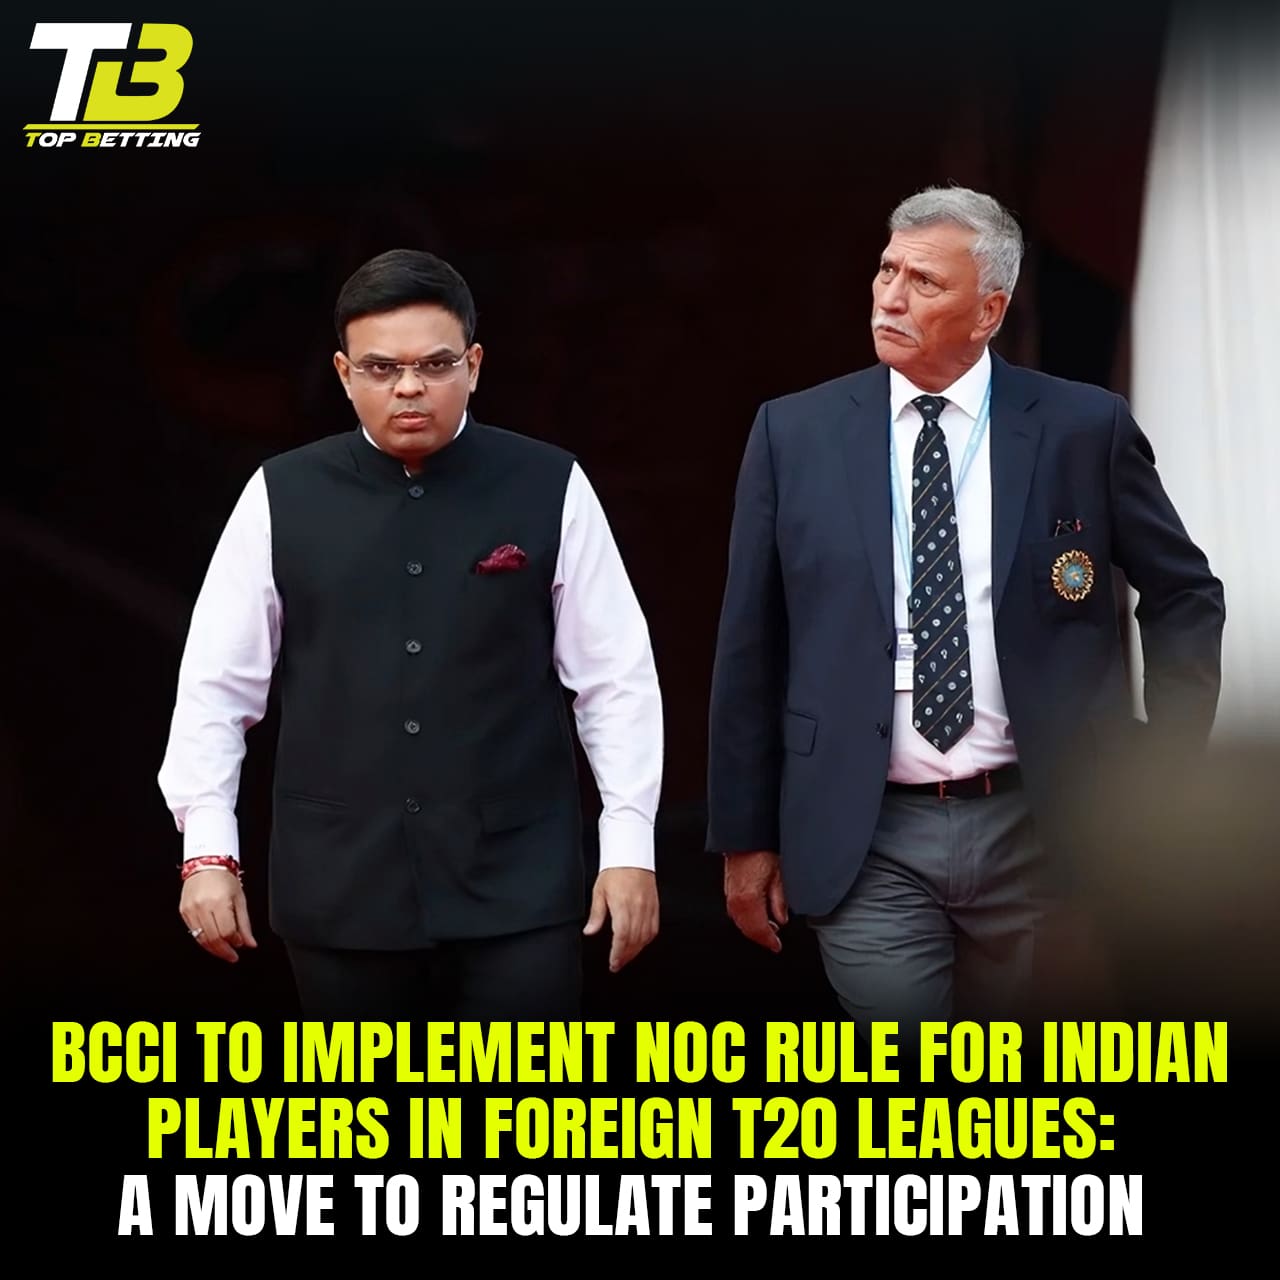 BCCI to Implement NOC Rule for Indian Players in Foreign T20 Leagues: A Move to Regulate Participation